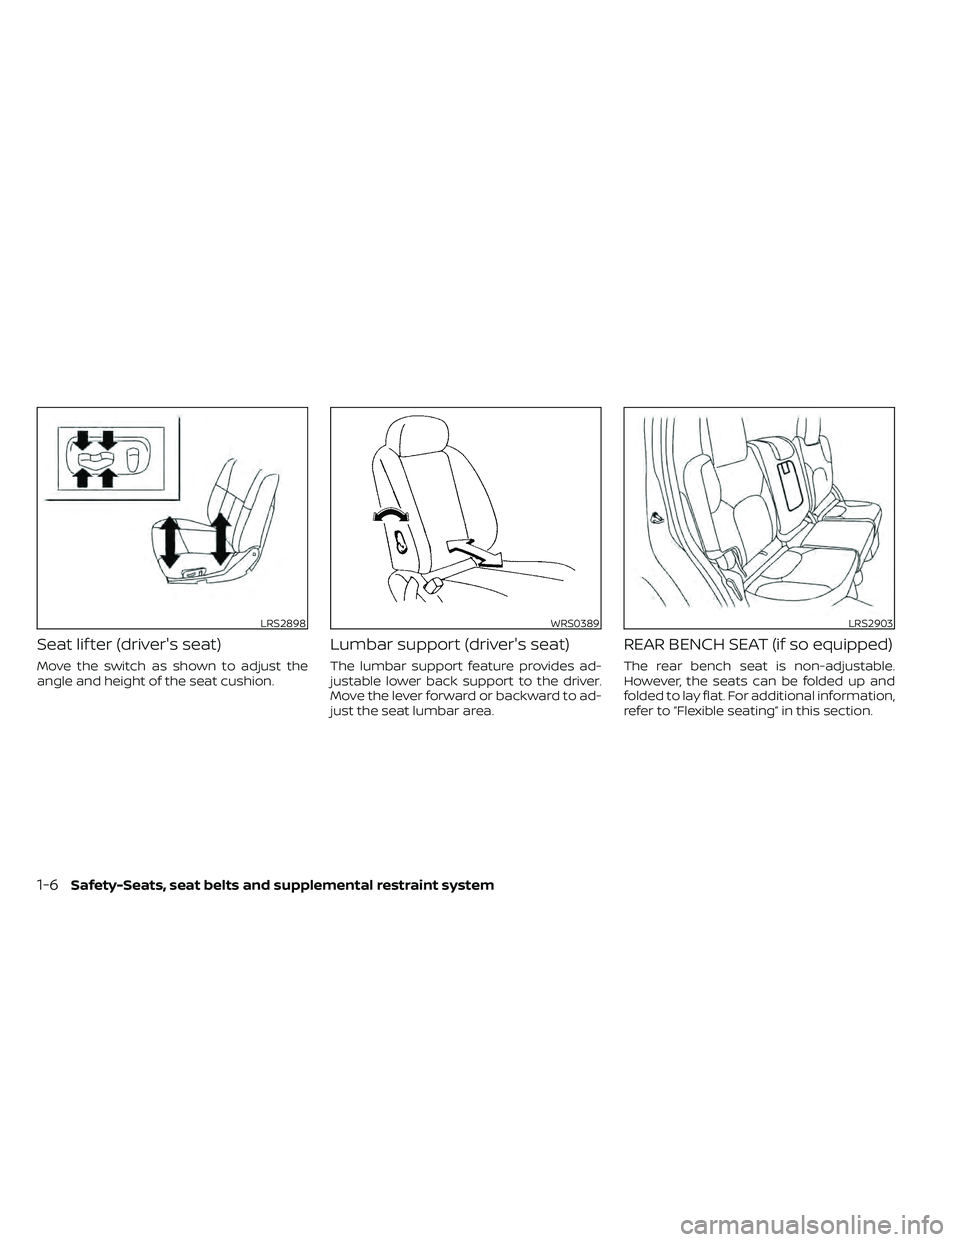 NISSAN FRONTIER 2020  Owner´s Manual Seat lif ter (driver's seat)
Move the switch as shown to adjust the
angle and height of the seat cushion.
Lumbar support (driver's seat)
The lumbar support feature provides ad-
justable lower 